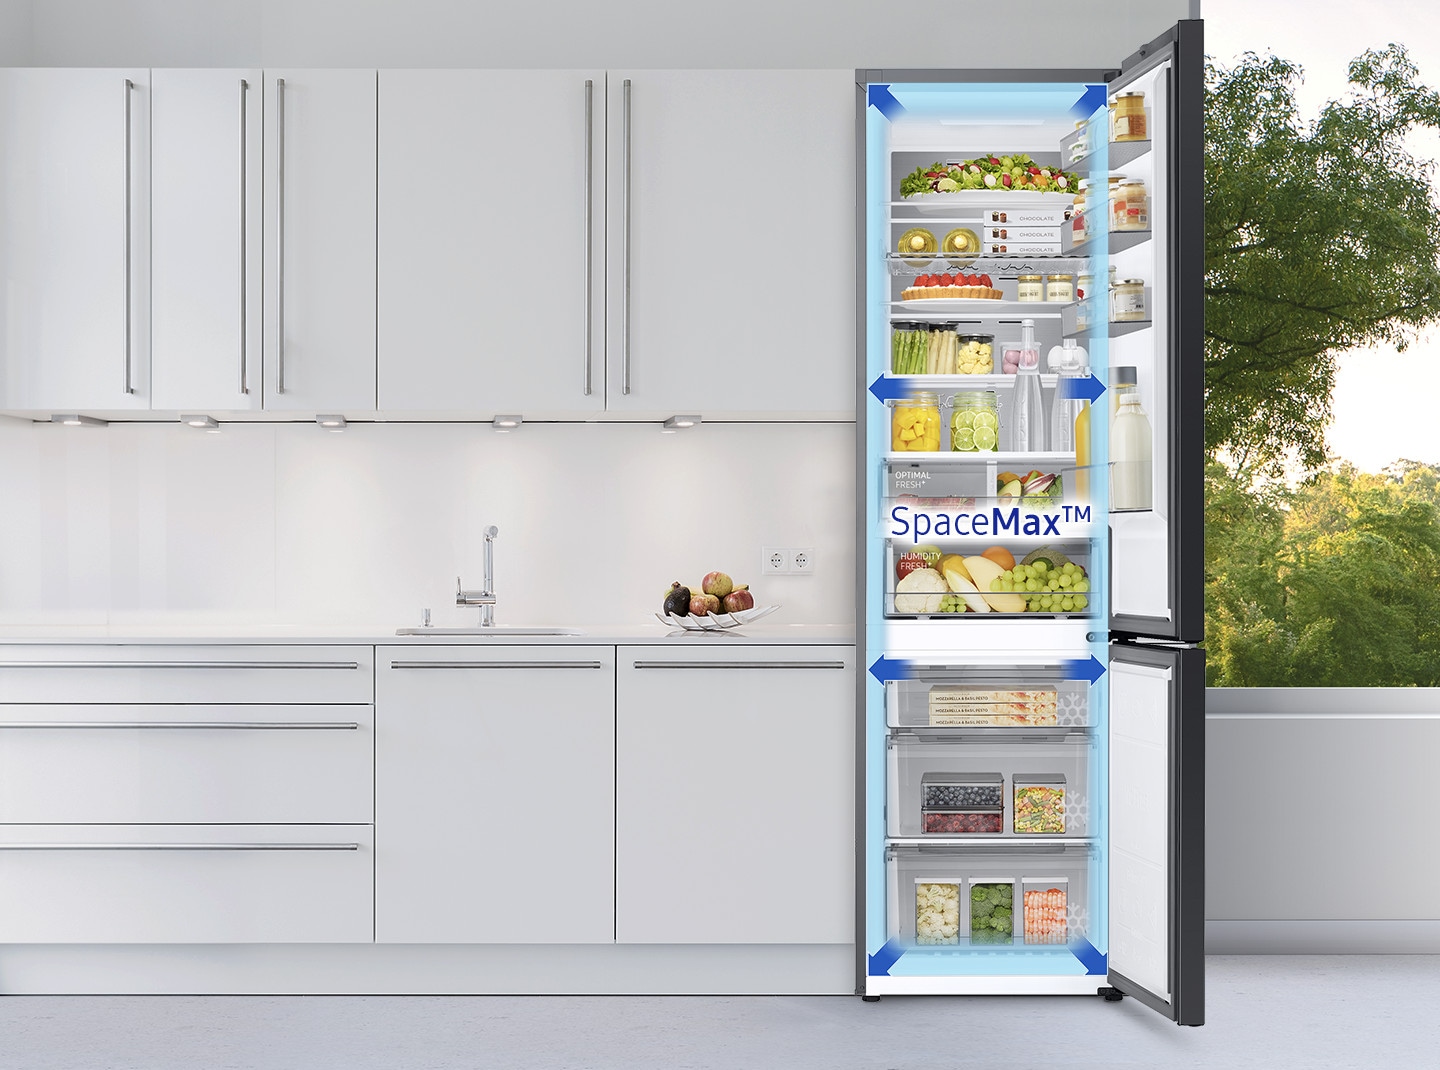 The door of the RB7300 has been opened in the kitchen, displaying arrows as large as SpaceMax™.